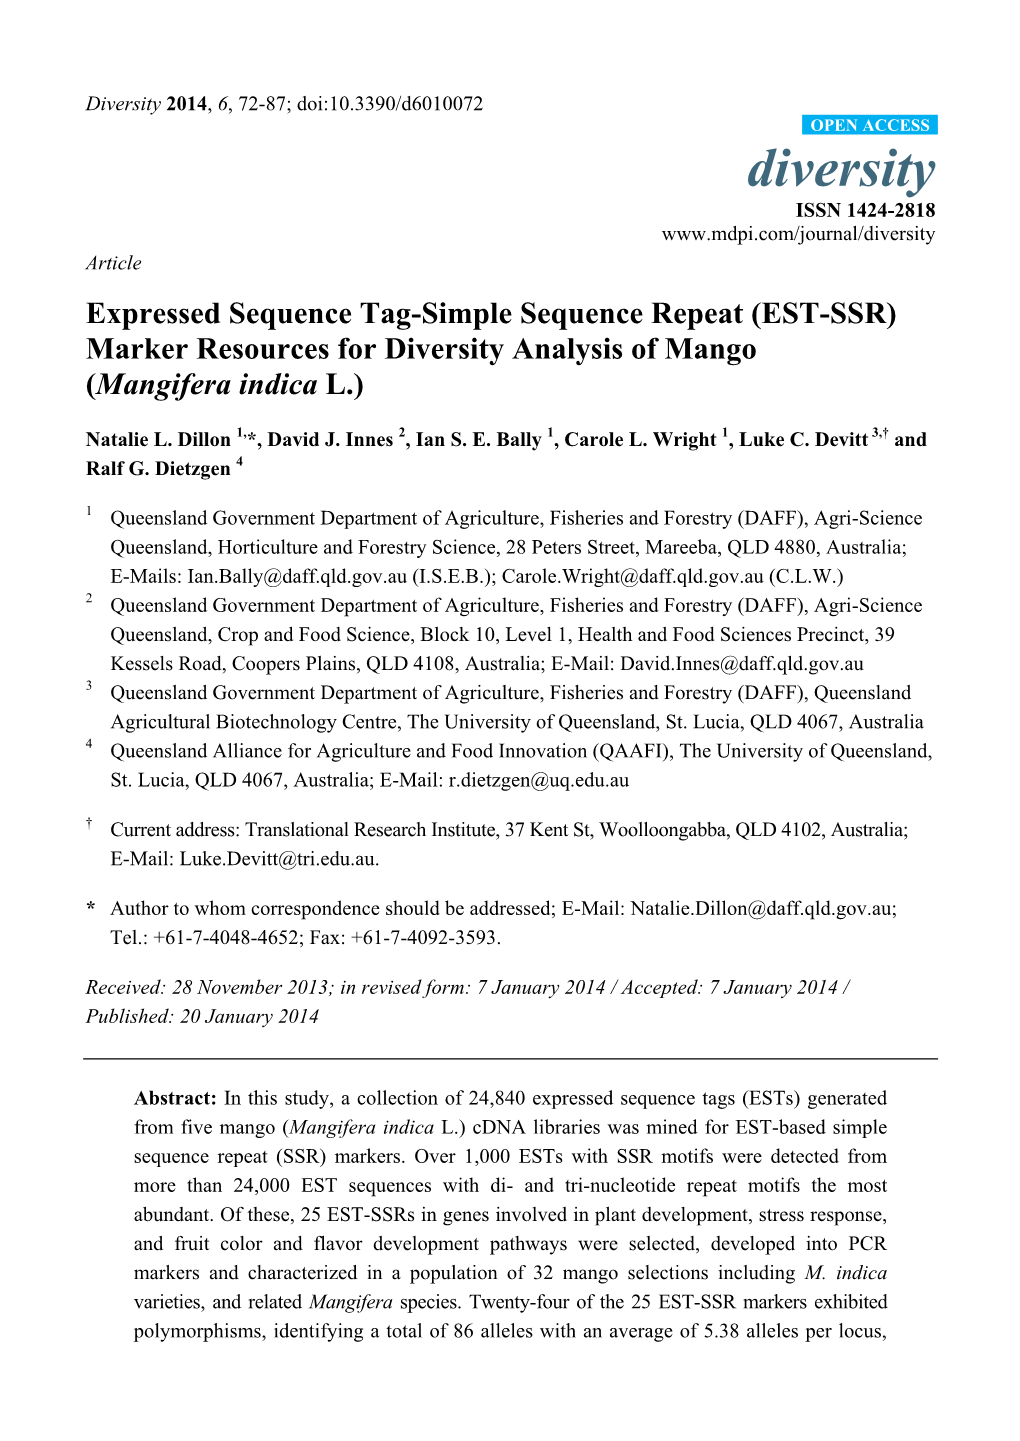 Expressed Sequence Tag-Simple Sequence Repeat (EST-SSR) Marker Resources for Diversity Analysis of Mango (Mangifera Indica L.)